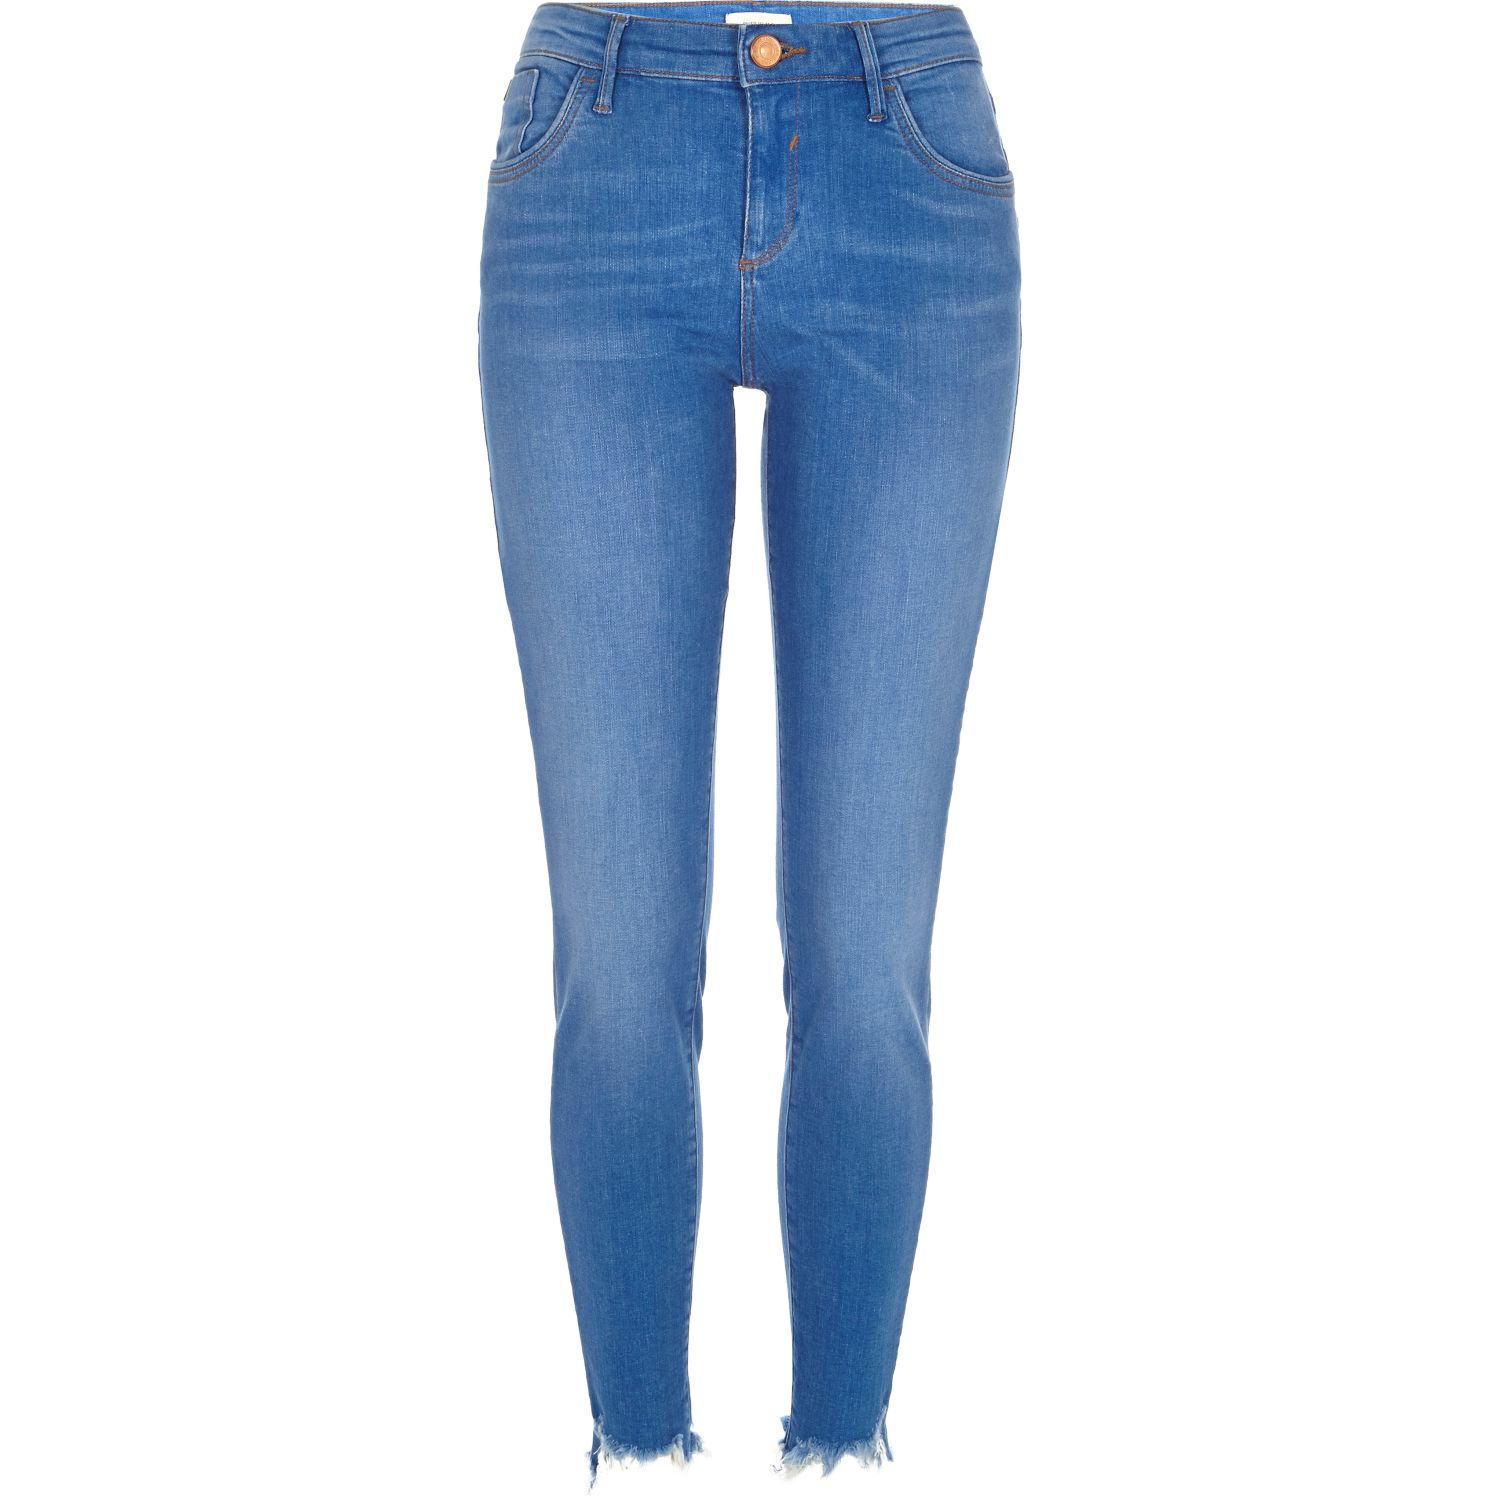 Lyst - River Island Bright Ripped Hem Amelie Superskinny Jeans in Blue